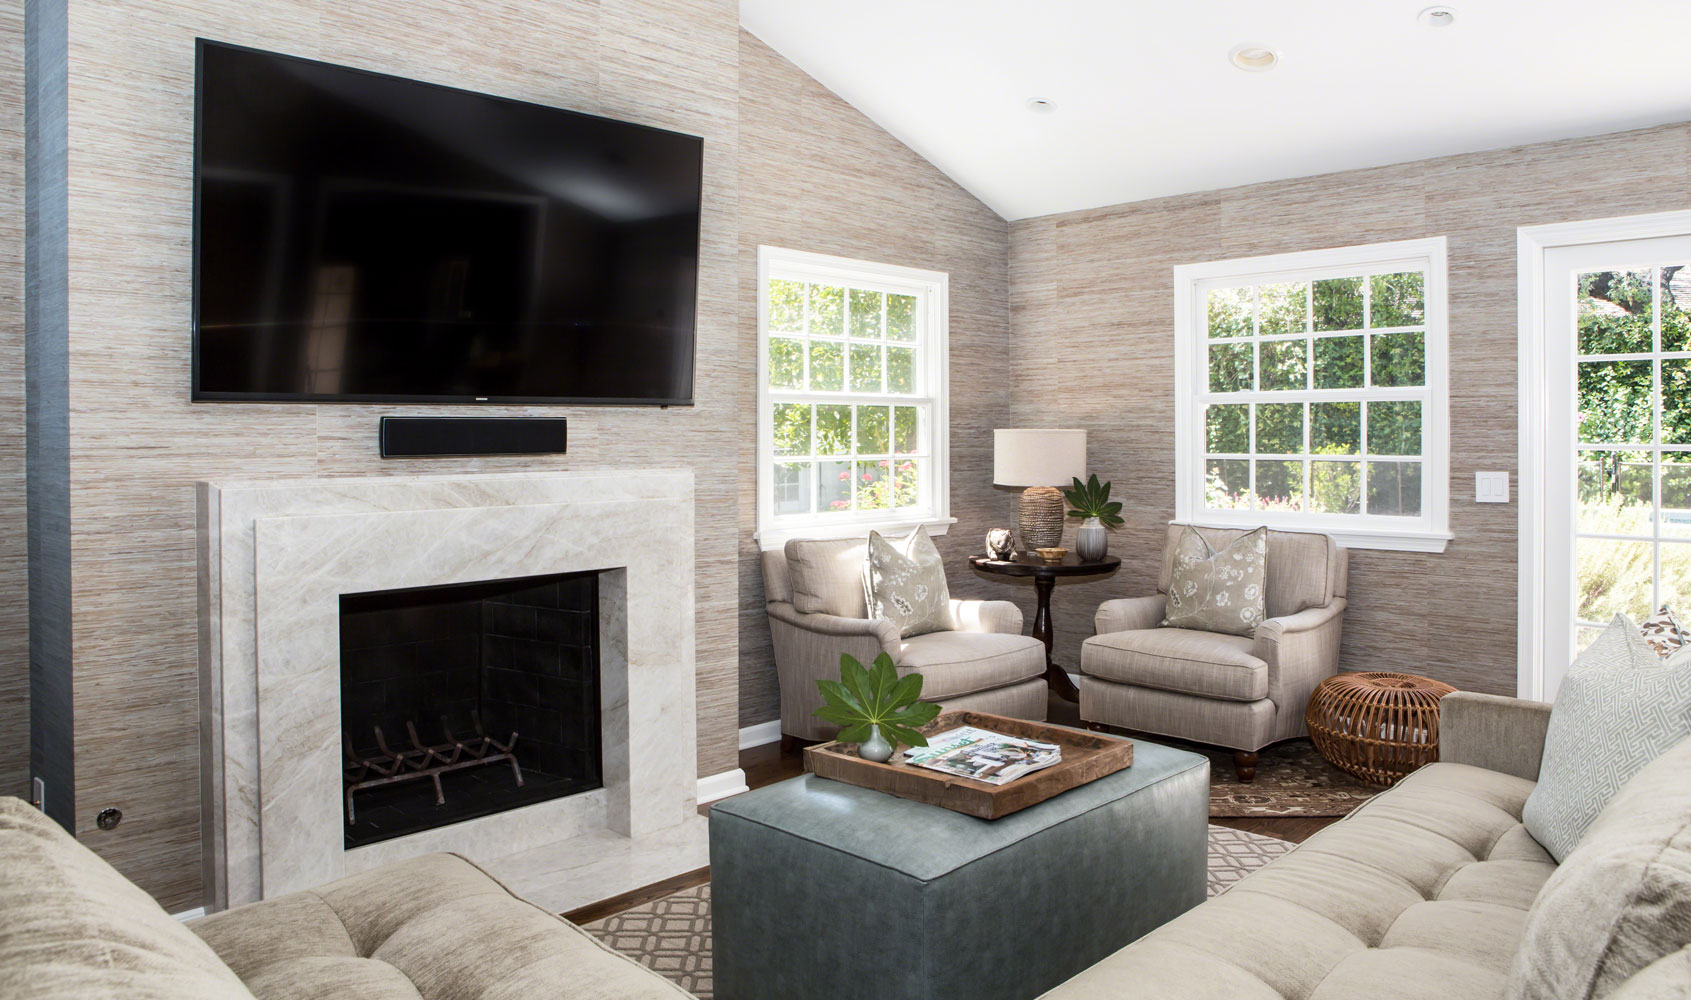 7-Waterford-fireplace-familyroom-contemporary.jpg